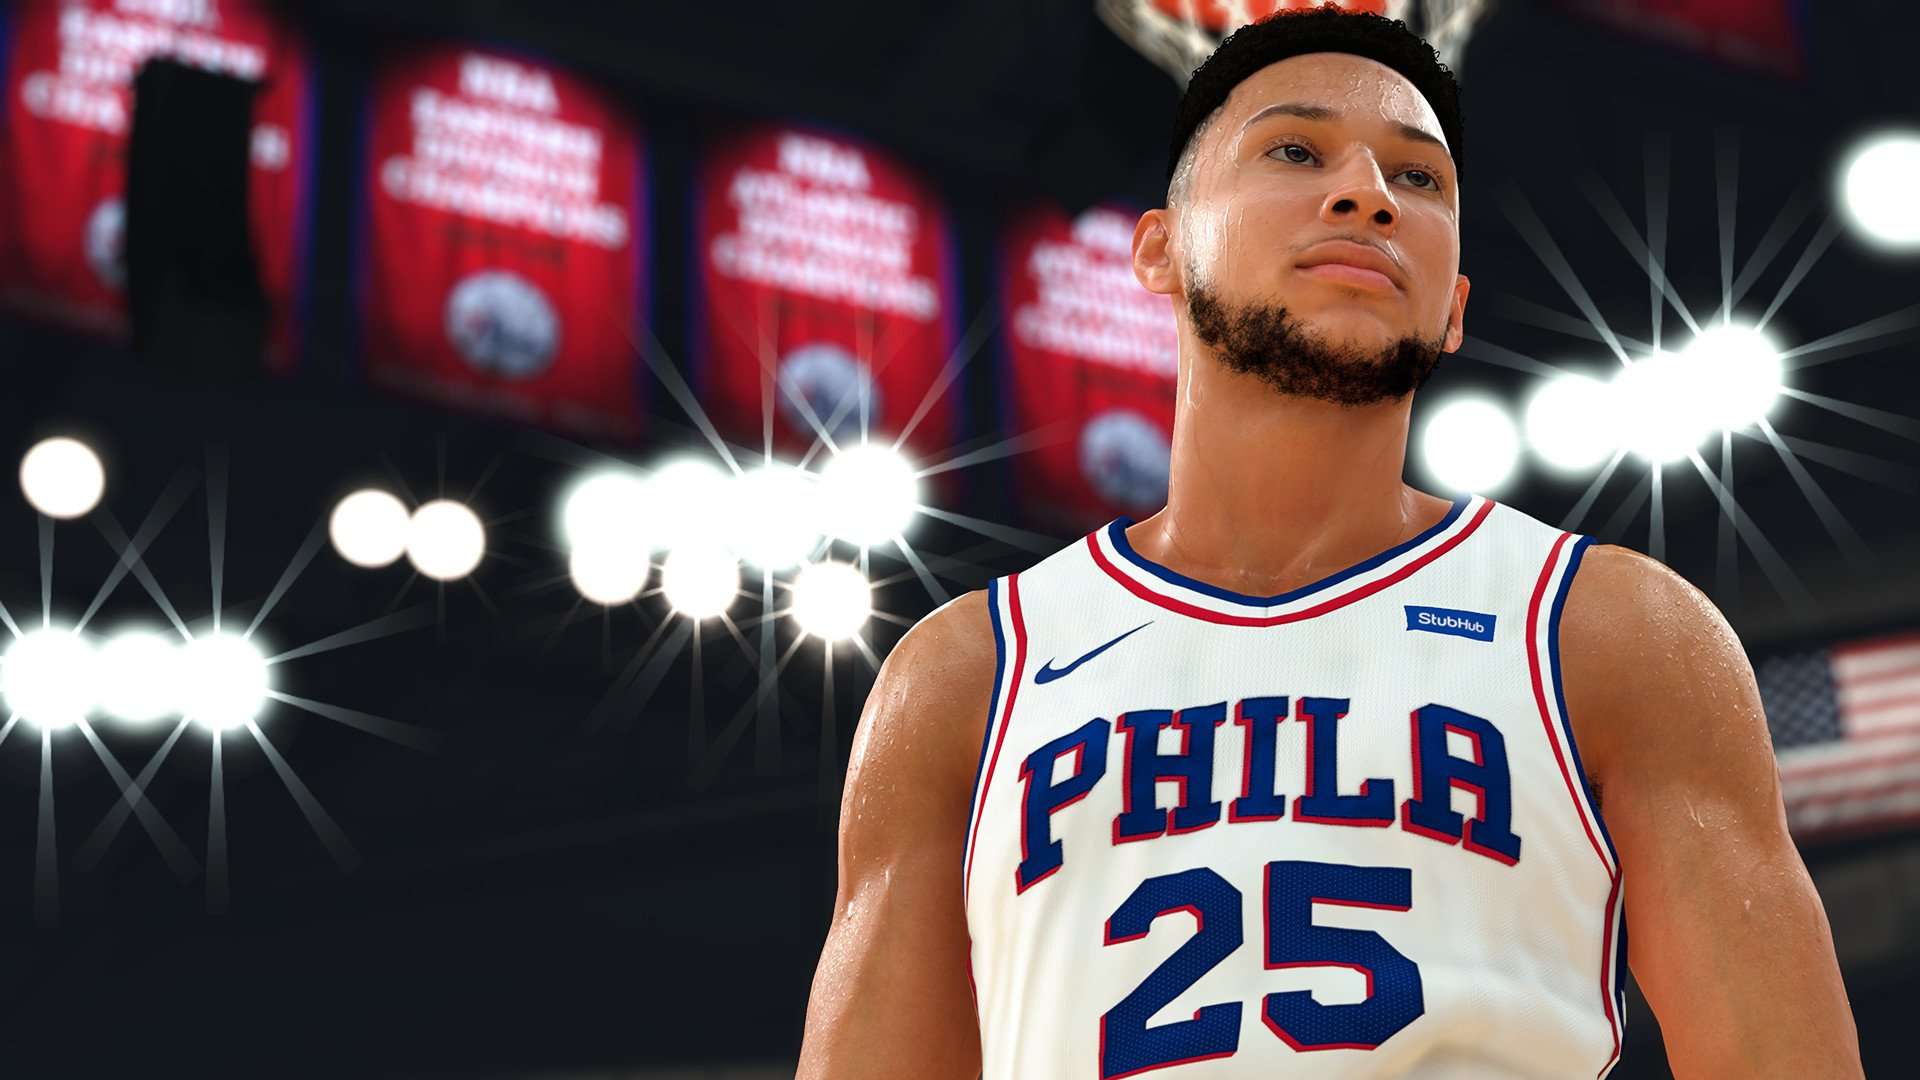 image for 2K asks fans to tell Belgium they want loot boxes